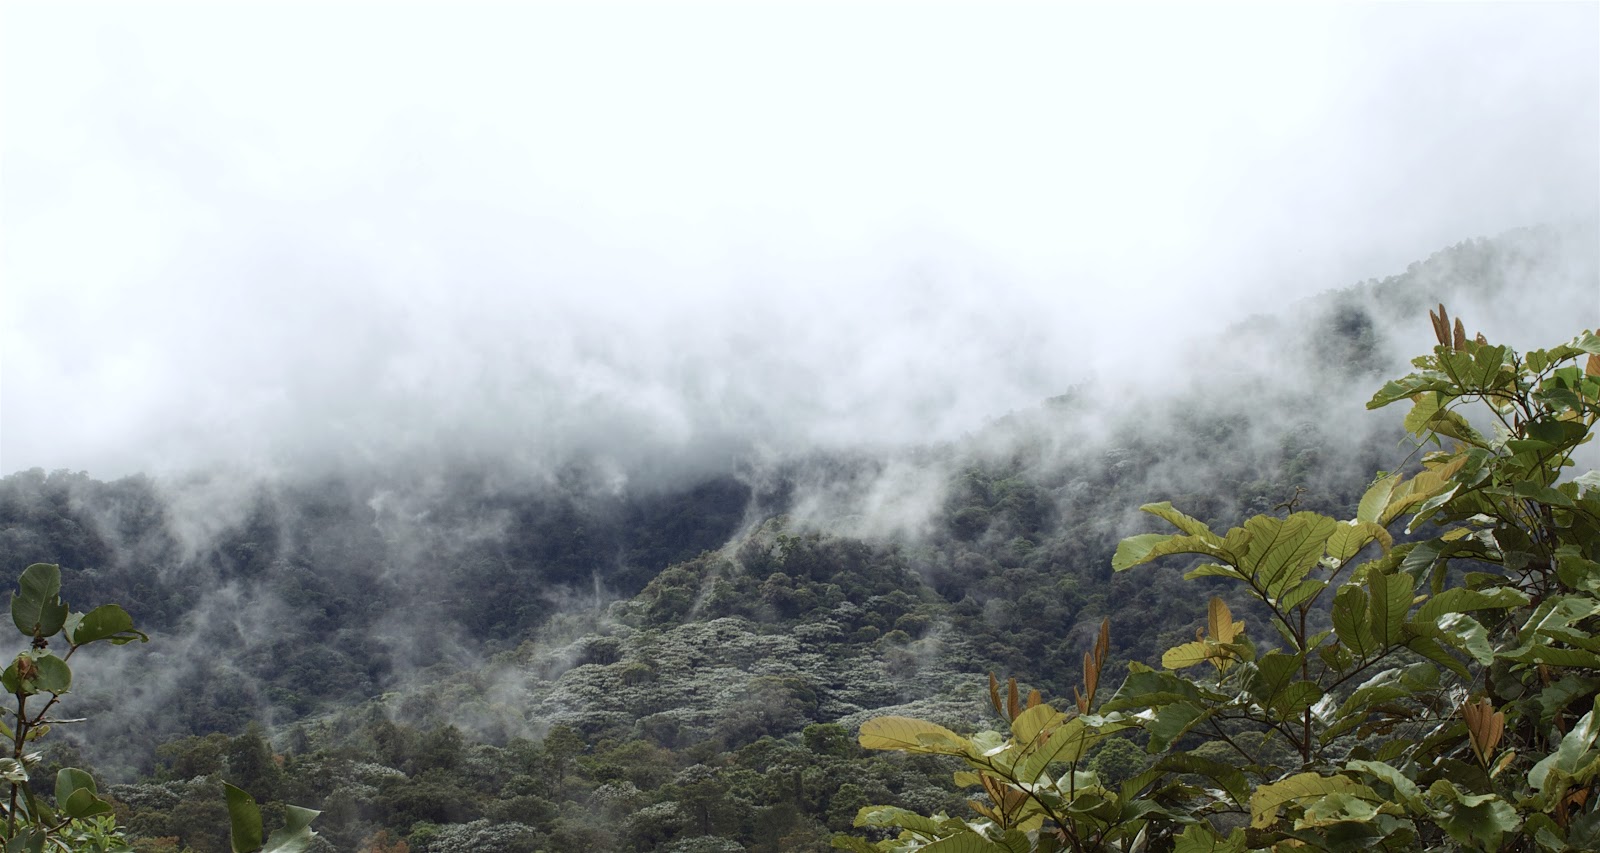 The Los Cedros Protected Forest, which protects primary endangered Chocó cloud forest habitat in northwestern Ecuador. Image credit: Marrow of the Mountain